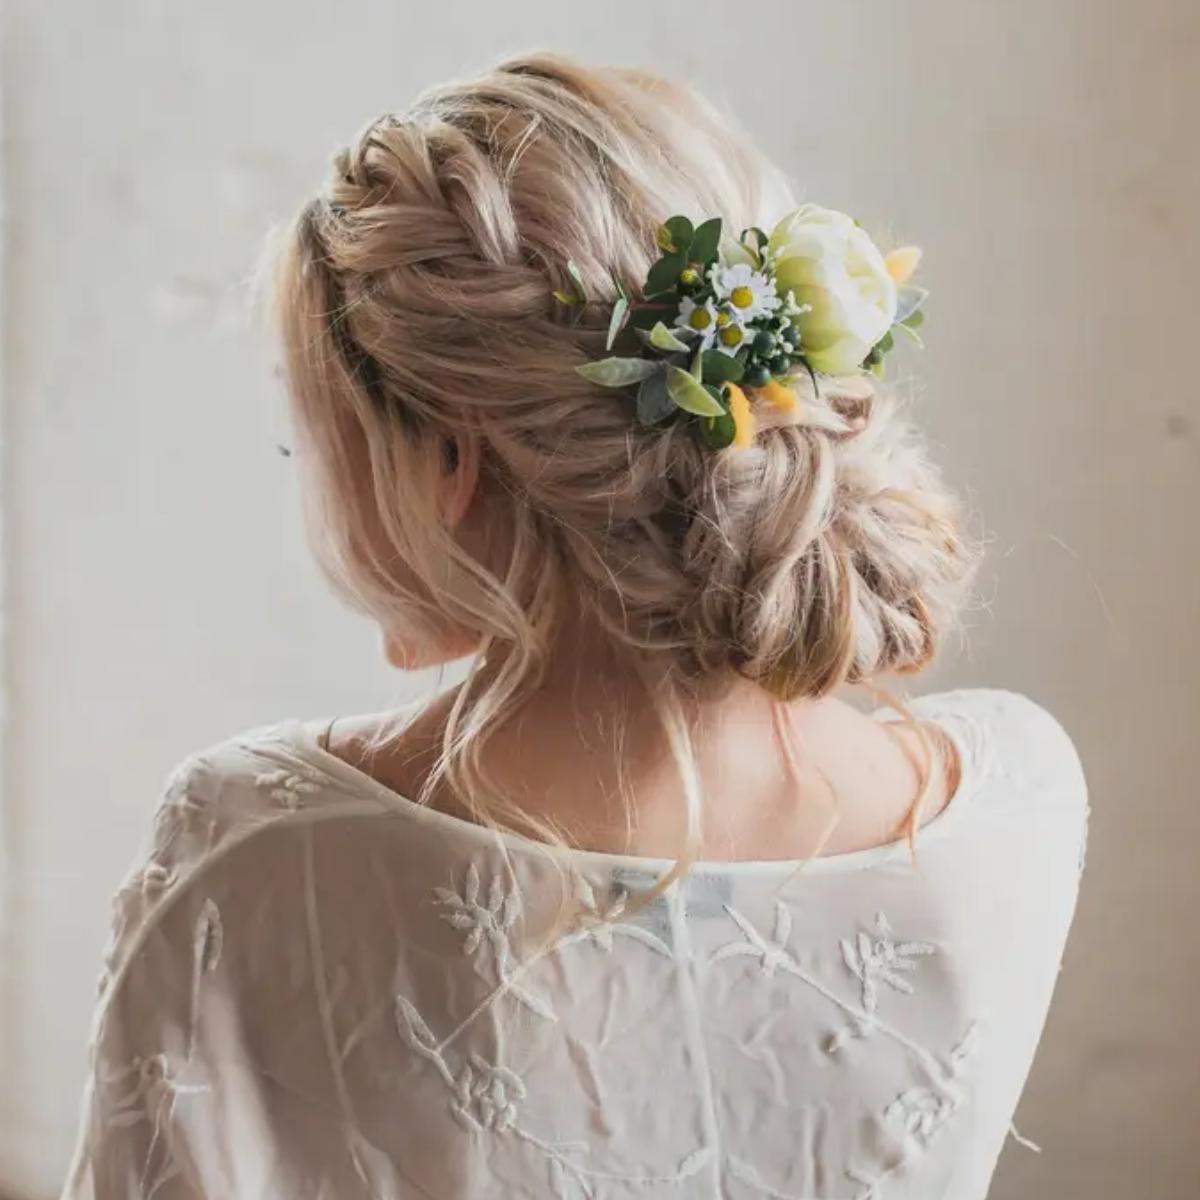 17 Stunning Wedding Hairstyles For Naturally Curly Hair